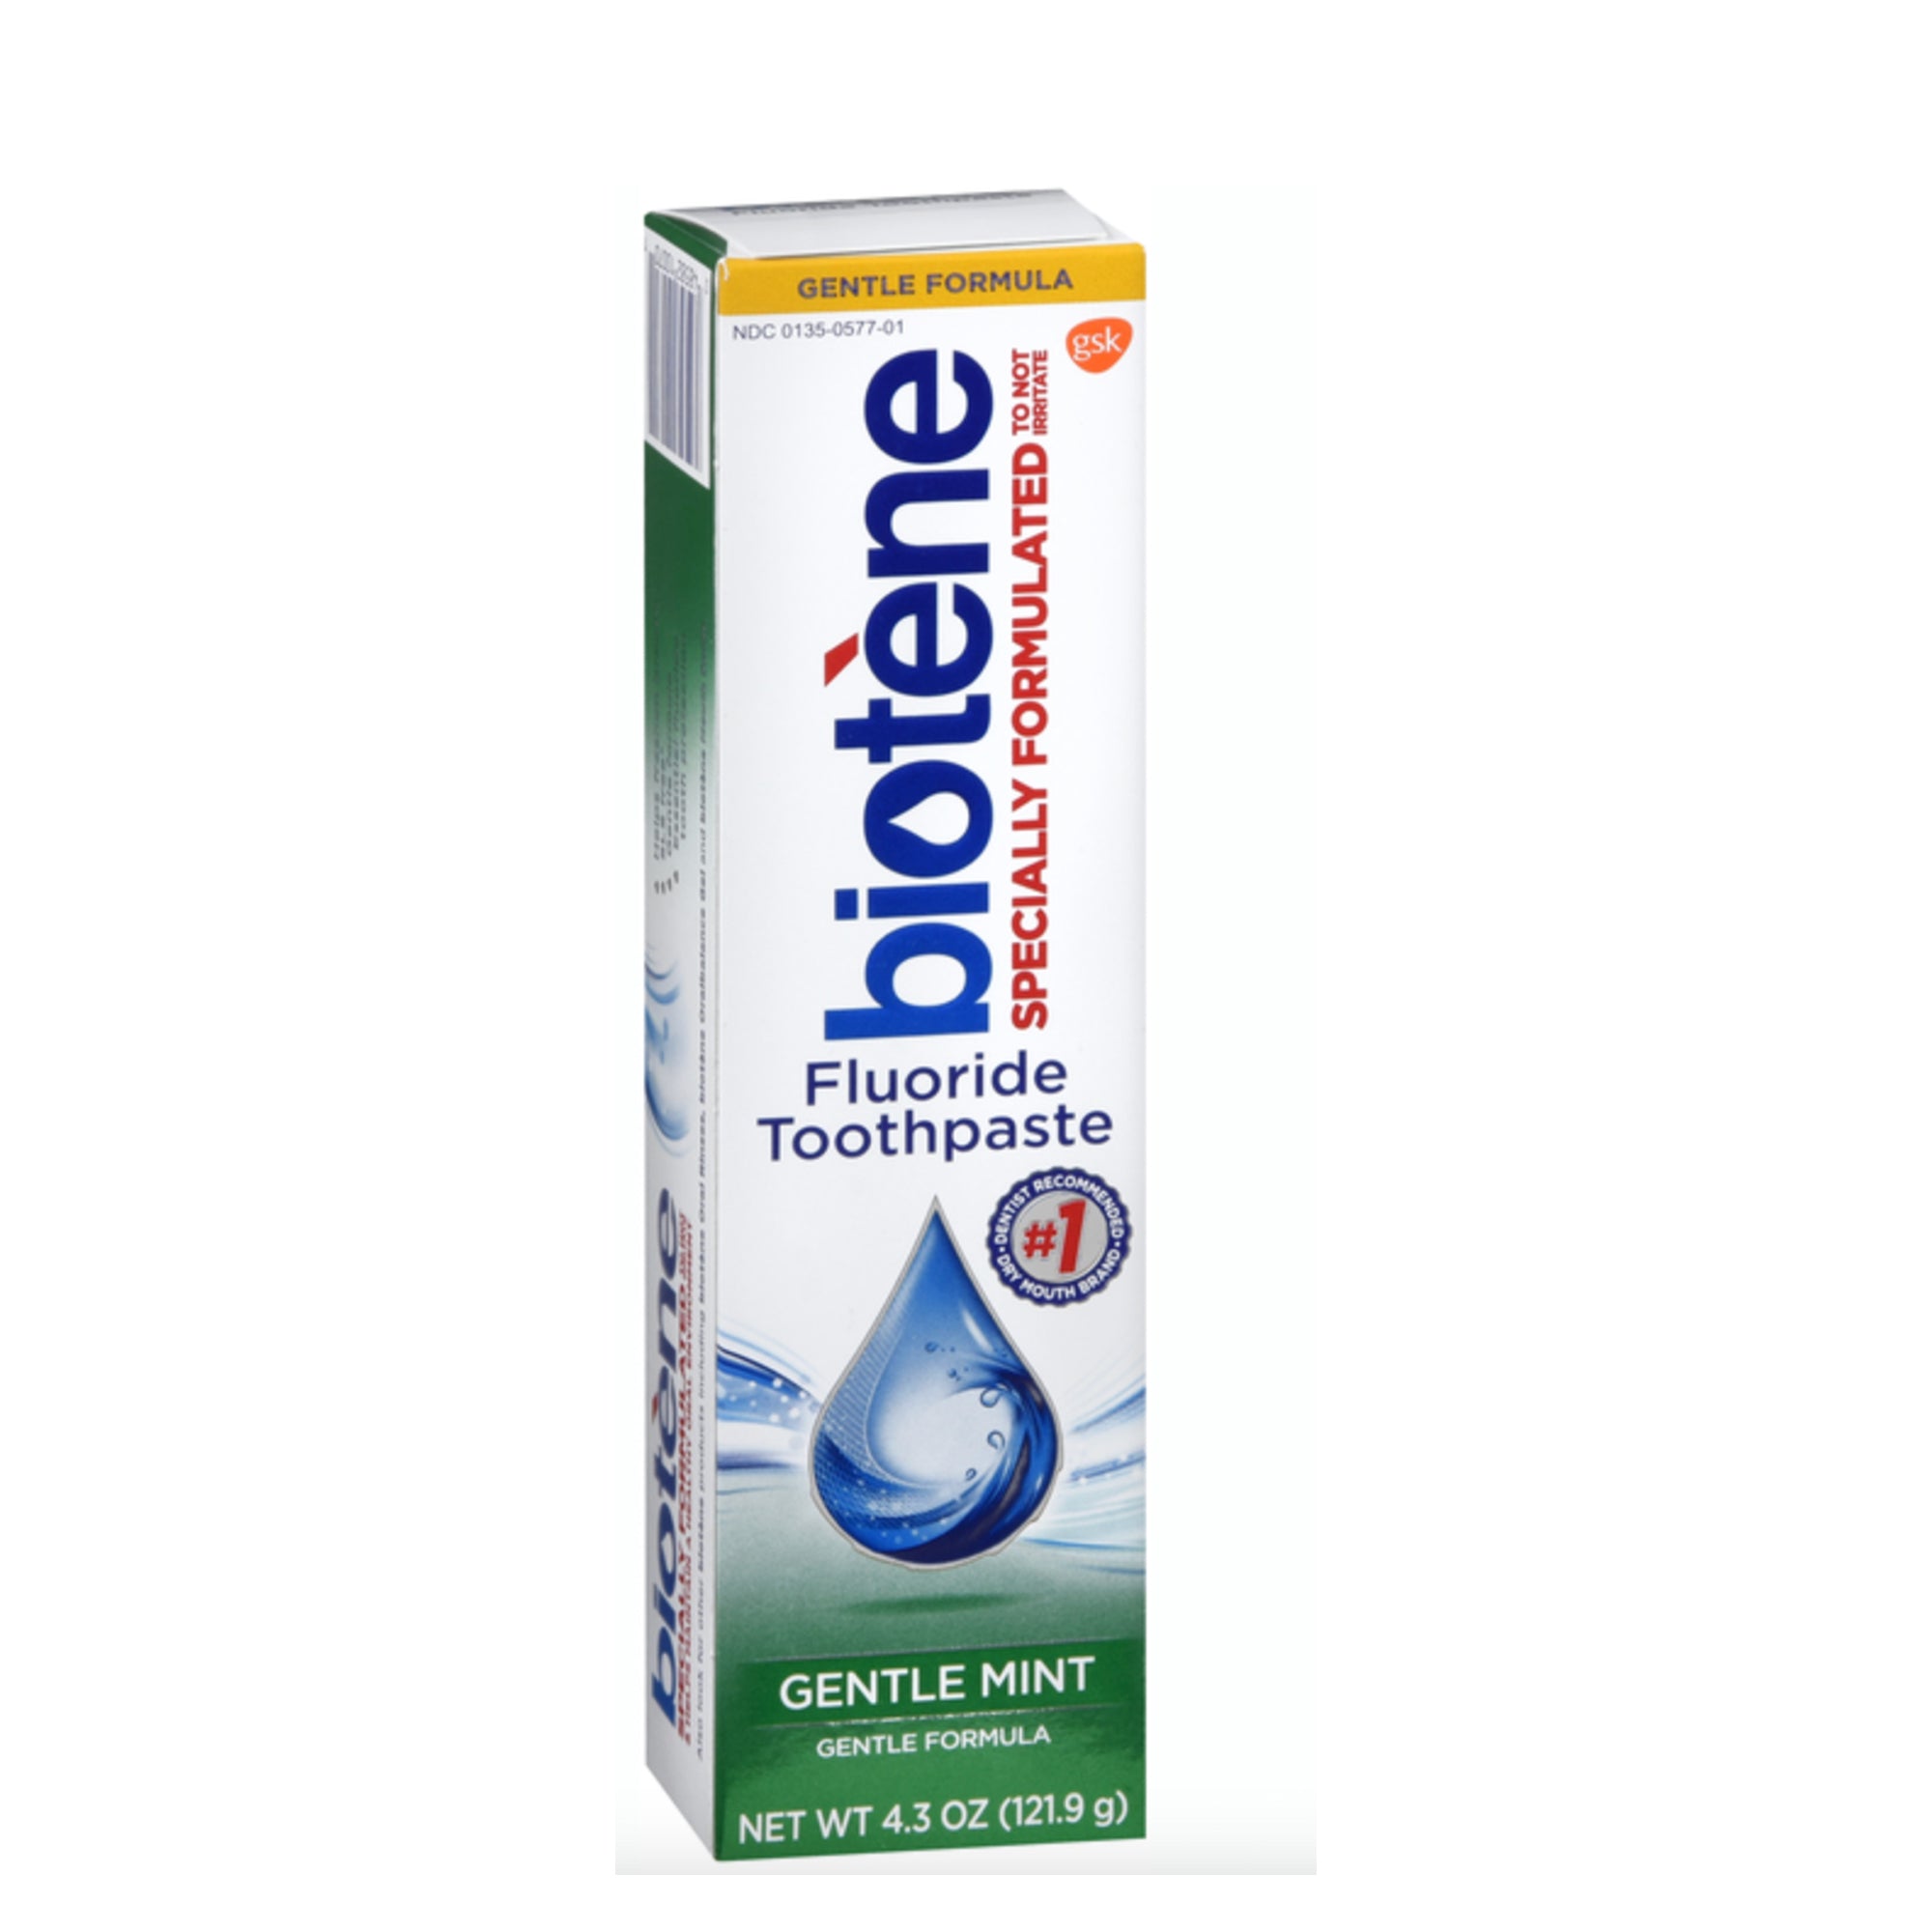 Biotene Dry Mouth Gentle Mint Tooth Paste, 4.3 oz